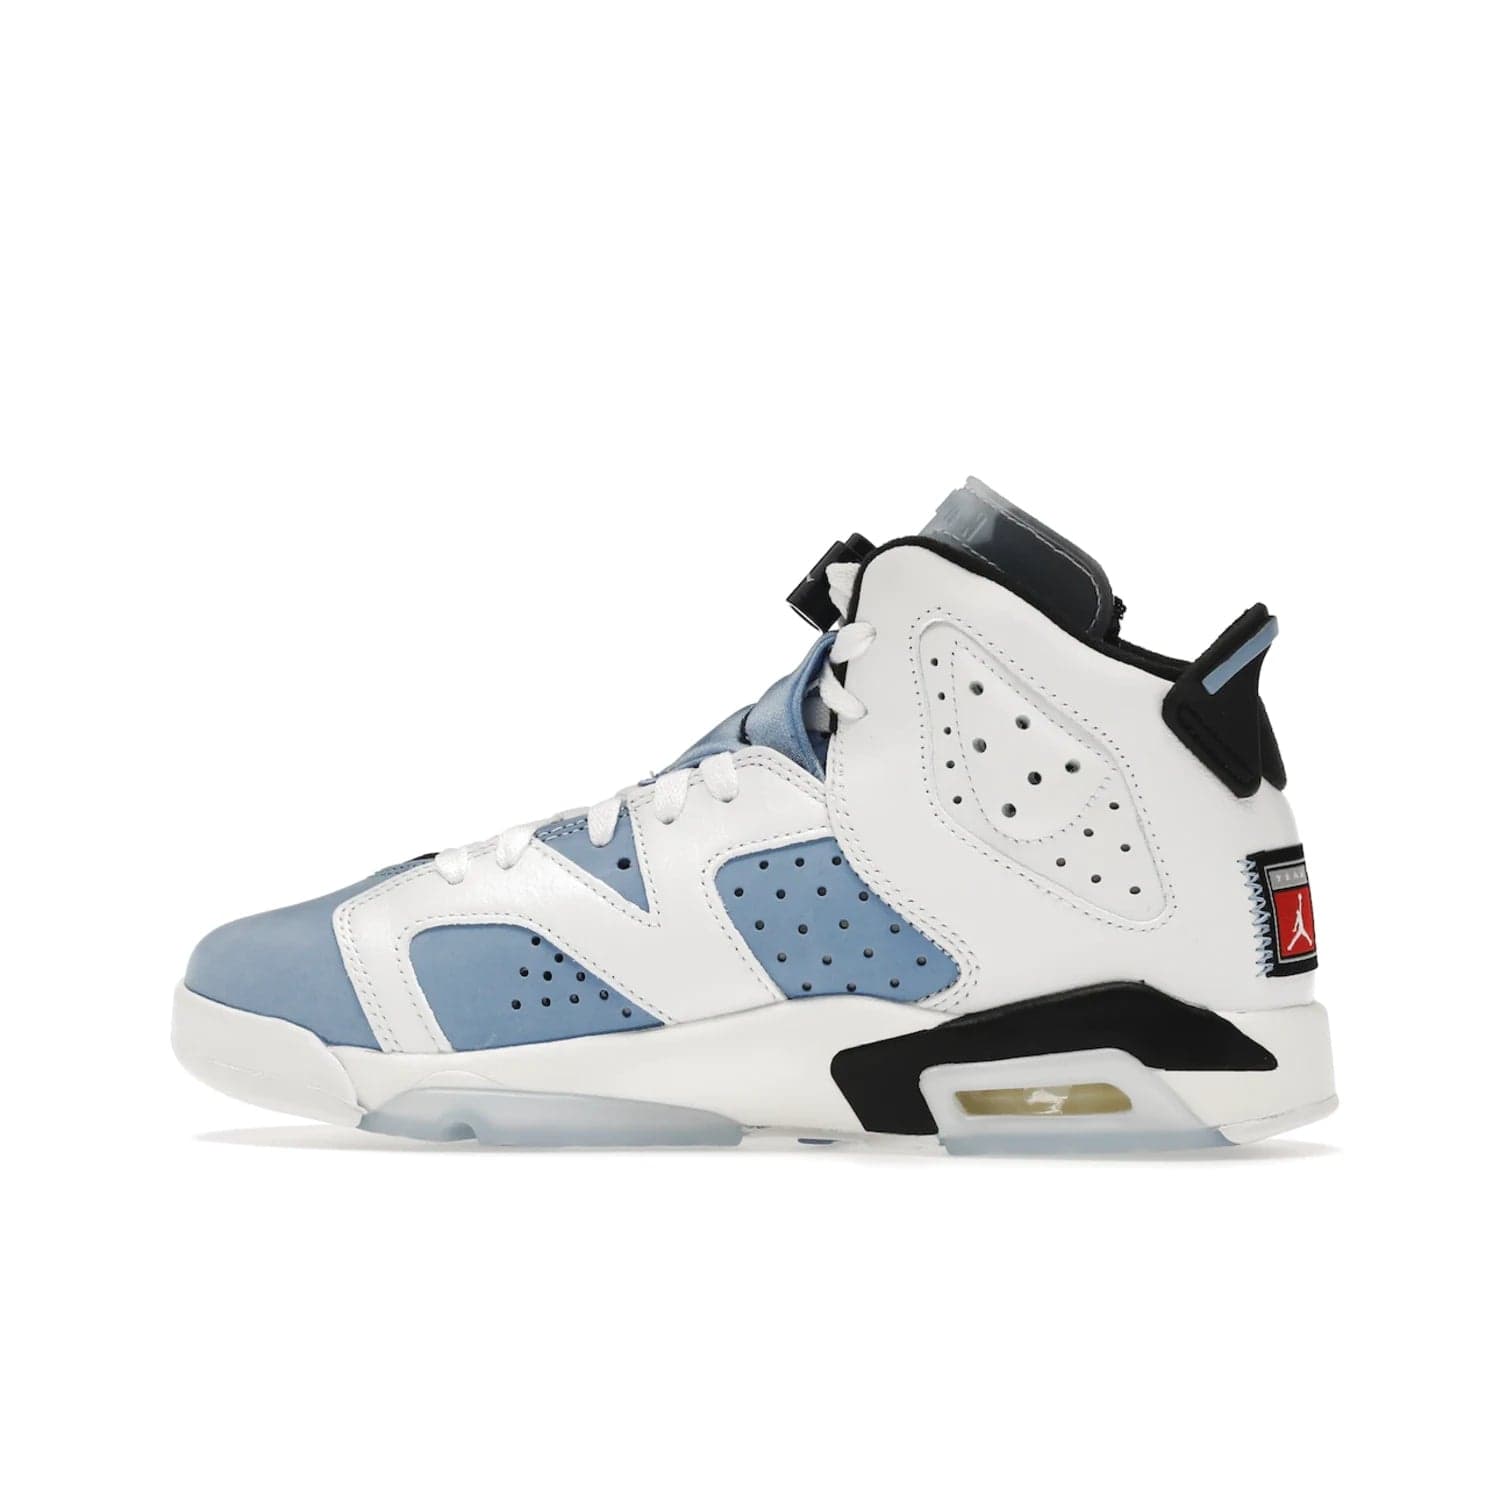 Jordan 6 Retro UNC White (GS) - Image 20 - Only at www.BallersClubKickz.com - Air Jordan 6 Retro UNC White GS: Michael Jordan alma mater, UNC Tar Heels, featuring colorway, nubuck, leather, Jumpman branding and a visible Air unit. Translucent blue/white outsole, perfect for completing sneaker rotation.